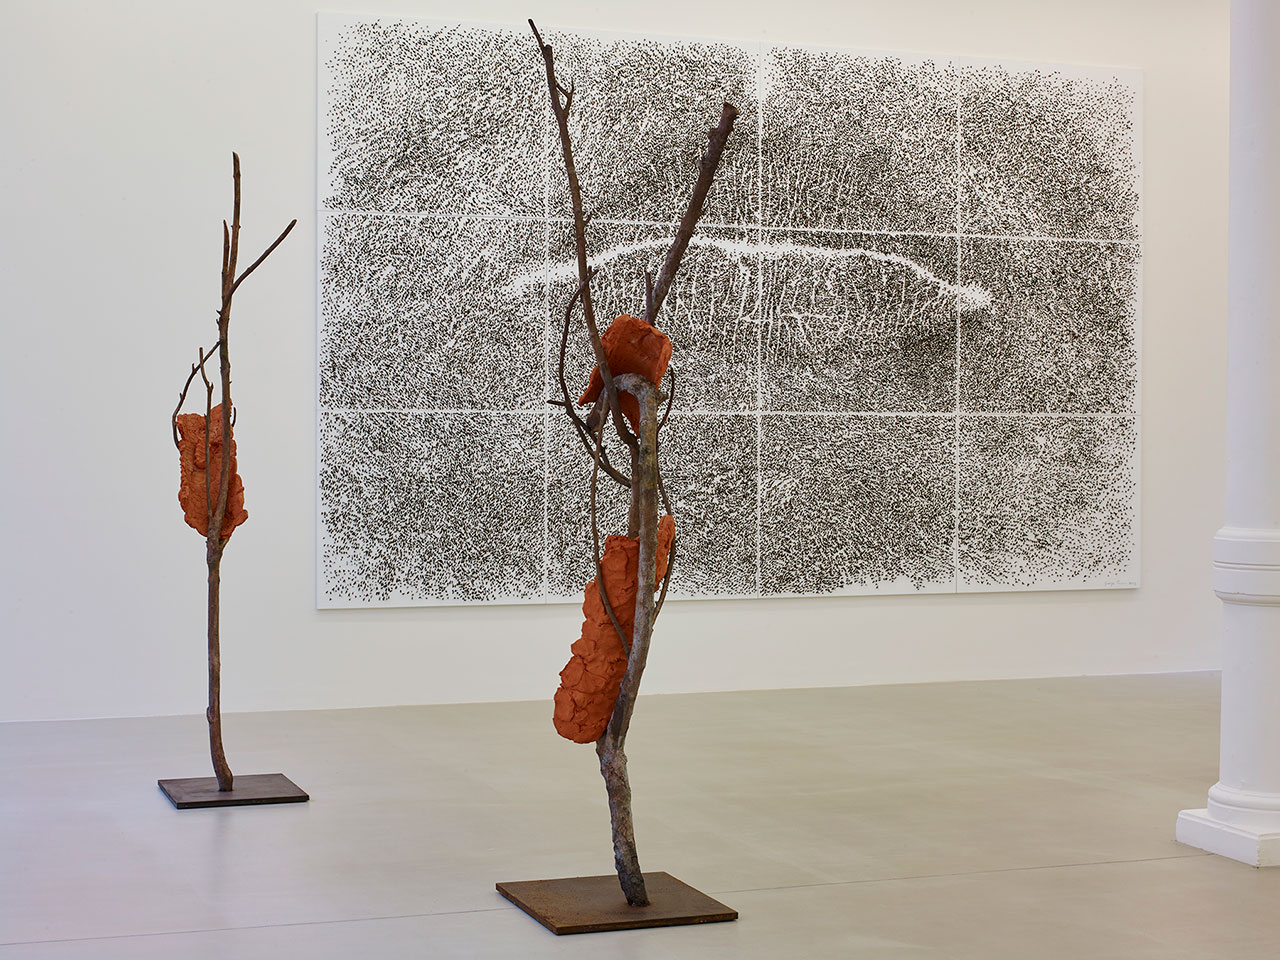 Giuseppe Penone, Fui, Saró, Non Sono (I was, I will be, I am not). Installation view from Marian Goodman Gallery London. Courtesy the artist and Marian Goodman Gallery.